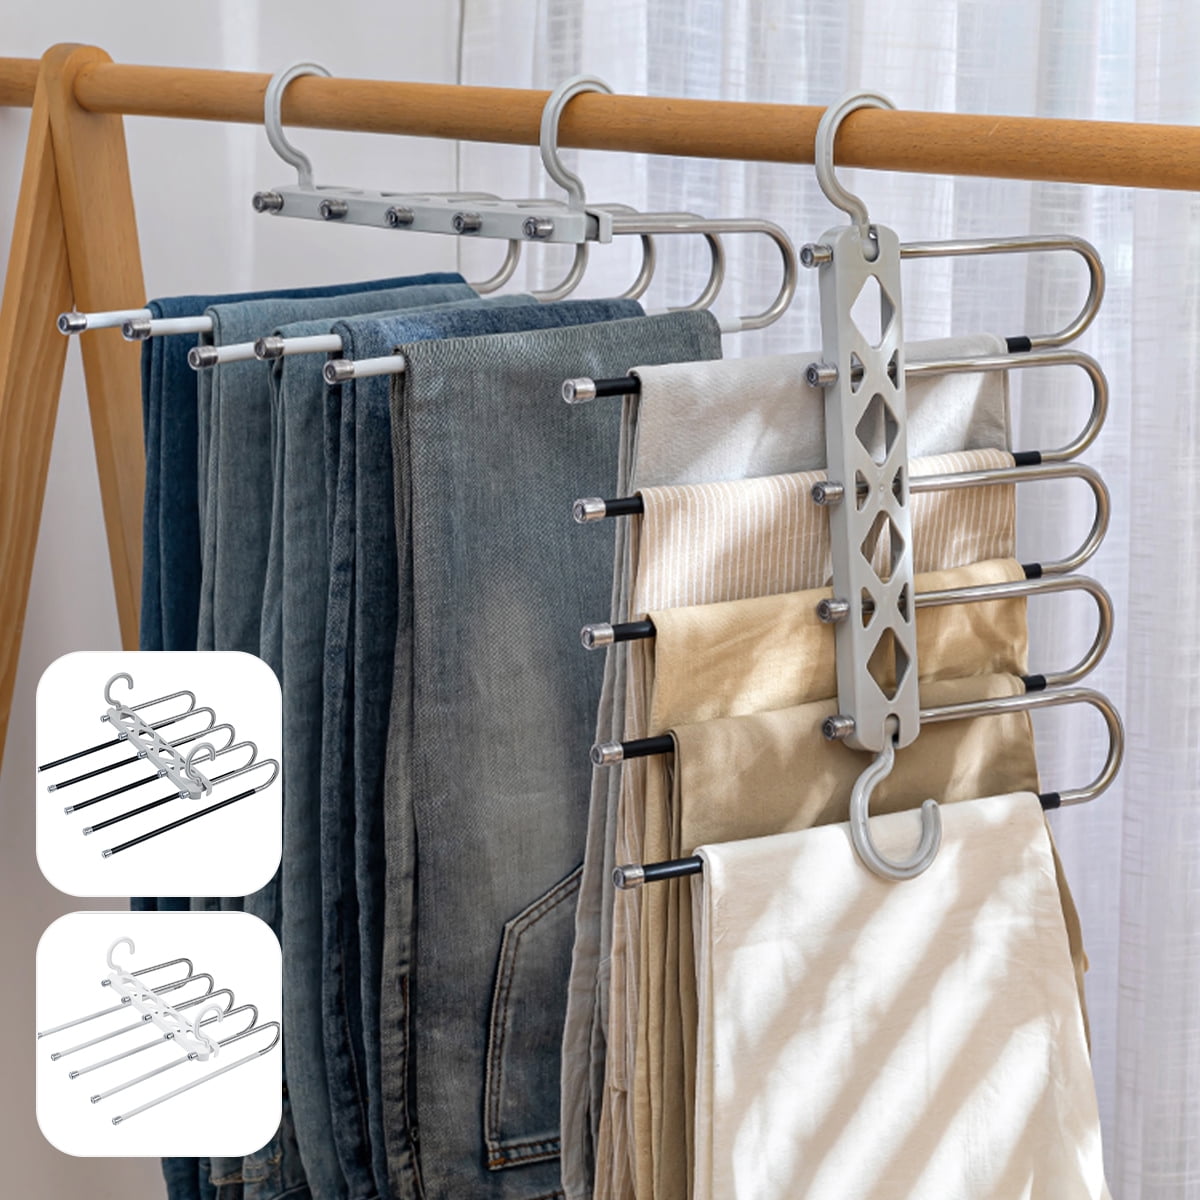 6-Tier Skirt Hangers,STAR-FLY Space Saving Pants Hangers Sturdy Multi-Purpose Stainless Steel Pants Jeans Slack Skirt Hangers with Clips Non-Slip Closet Storage Organizer（1pc） 